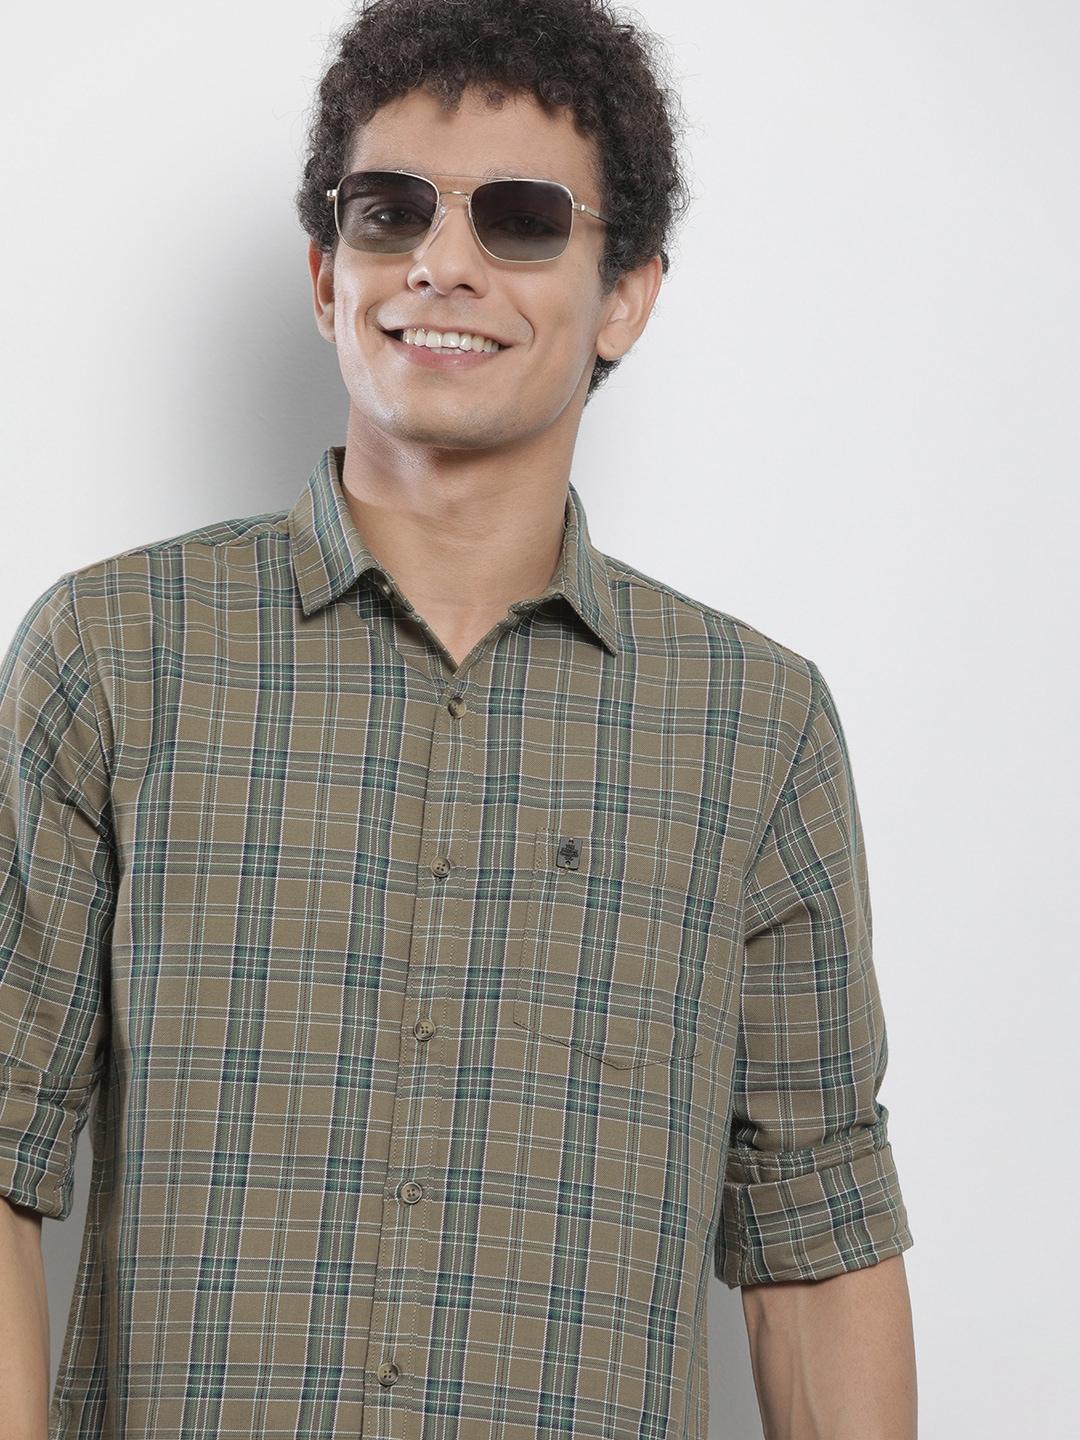 the-indian-garage-co-men-brown-&-green-checked-pure-cotton-casual-shirt